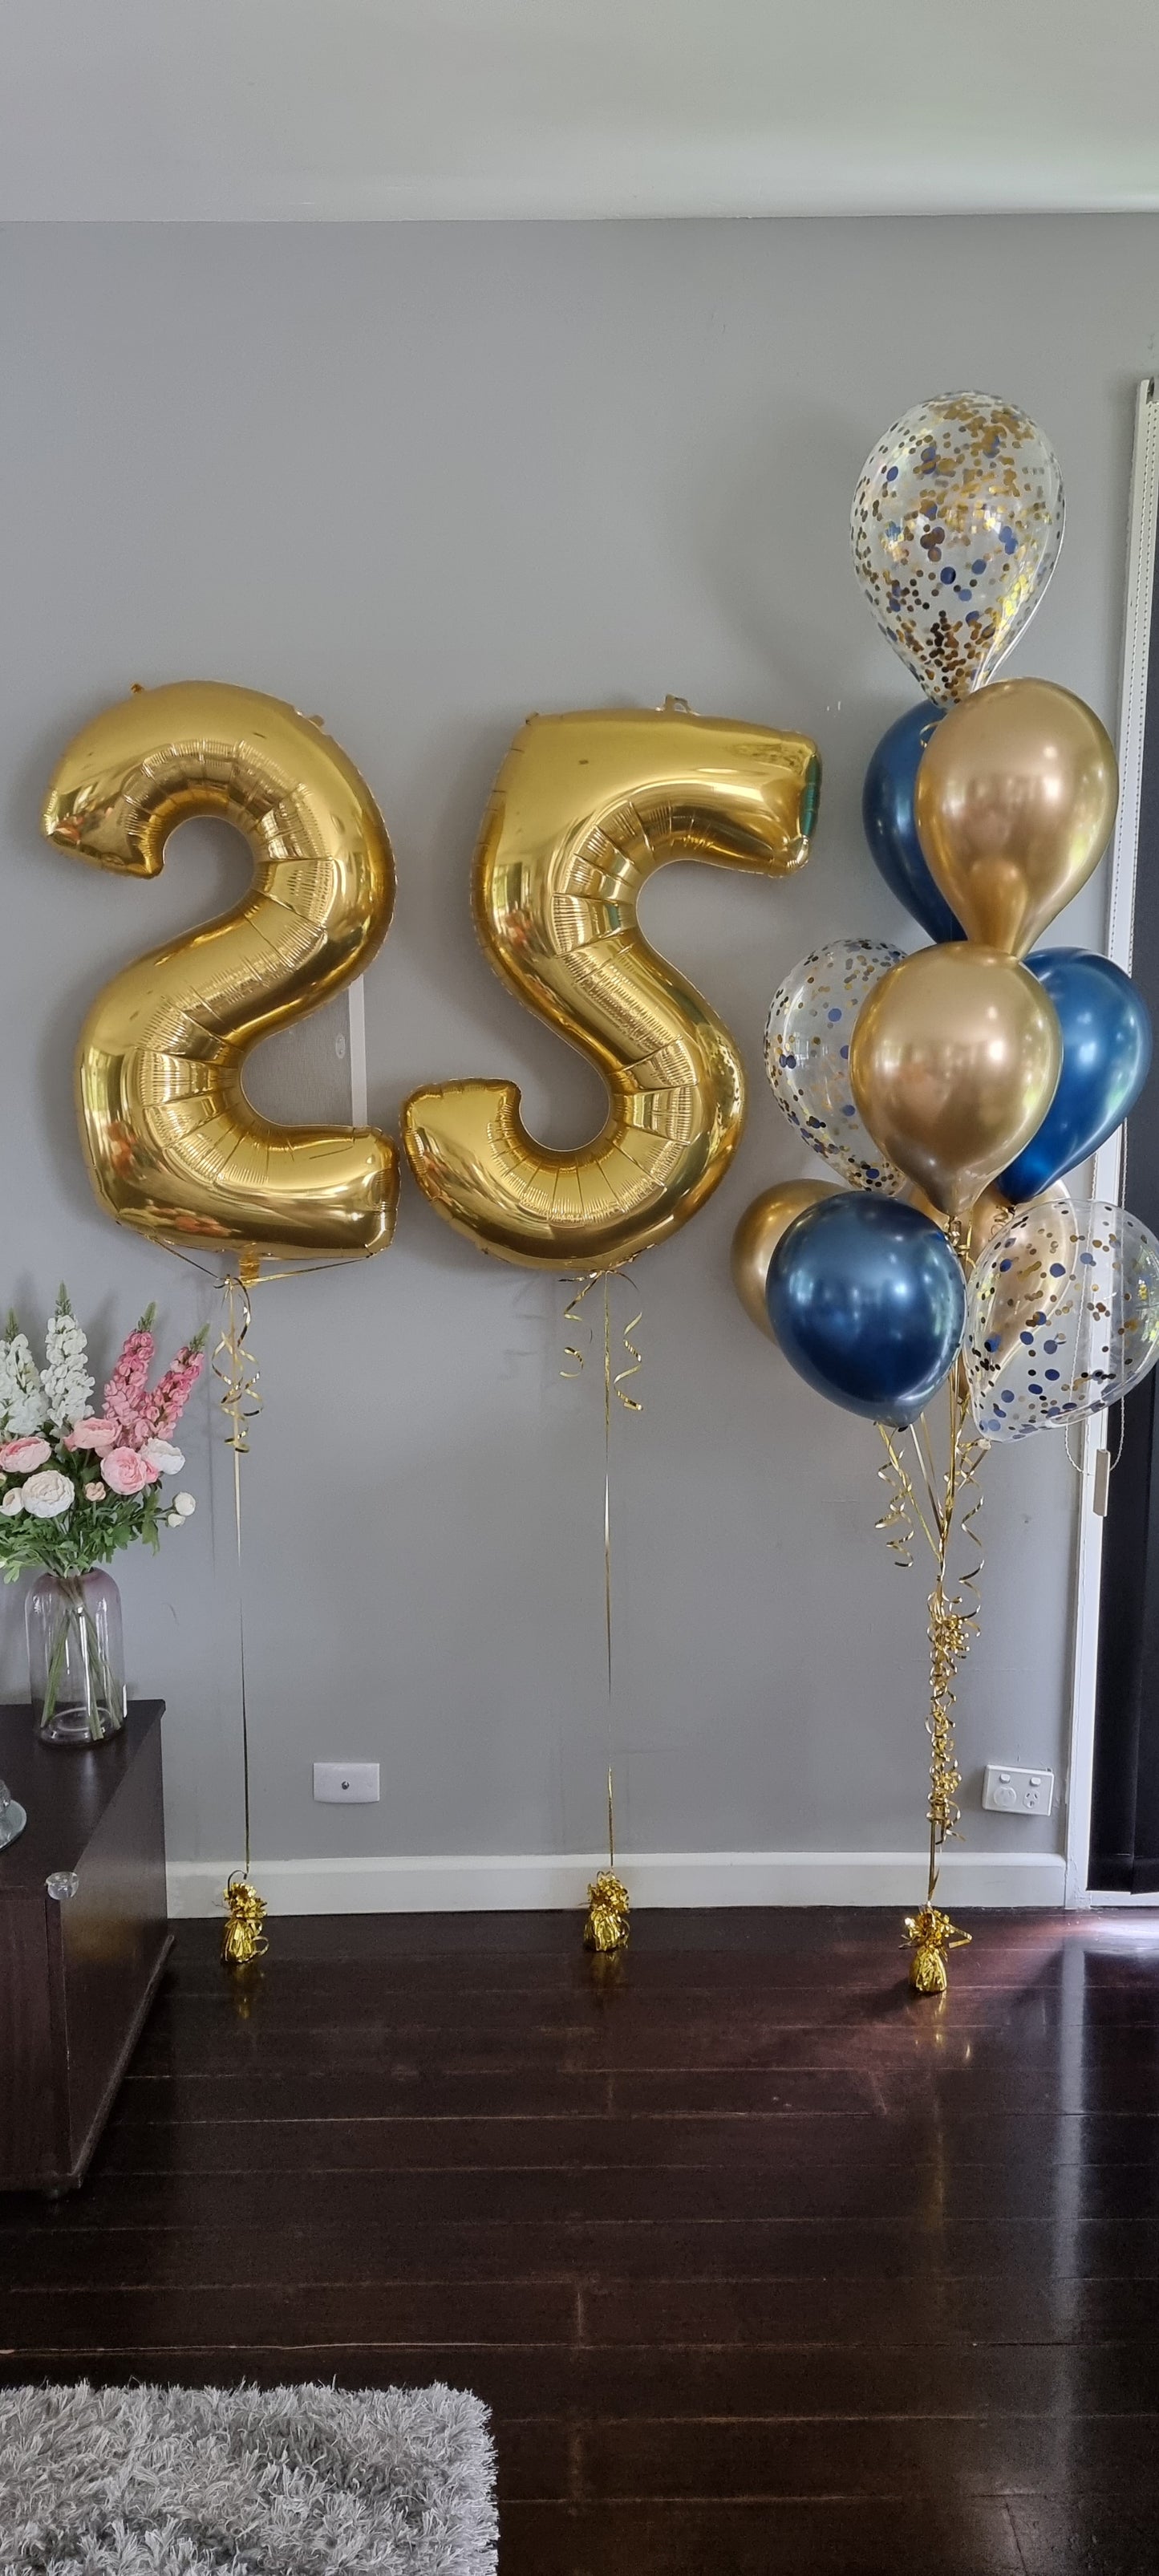 Dark Blue & Gold Number Balloons with a Large Helium Balloon Bouquet